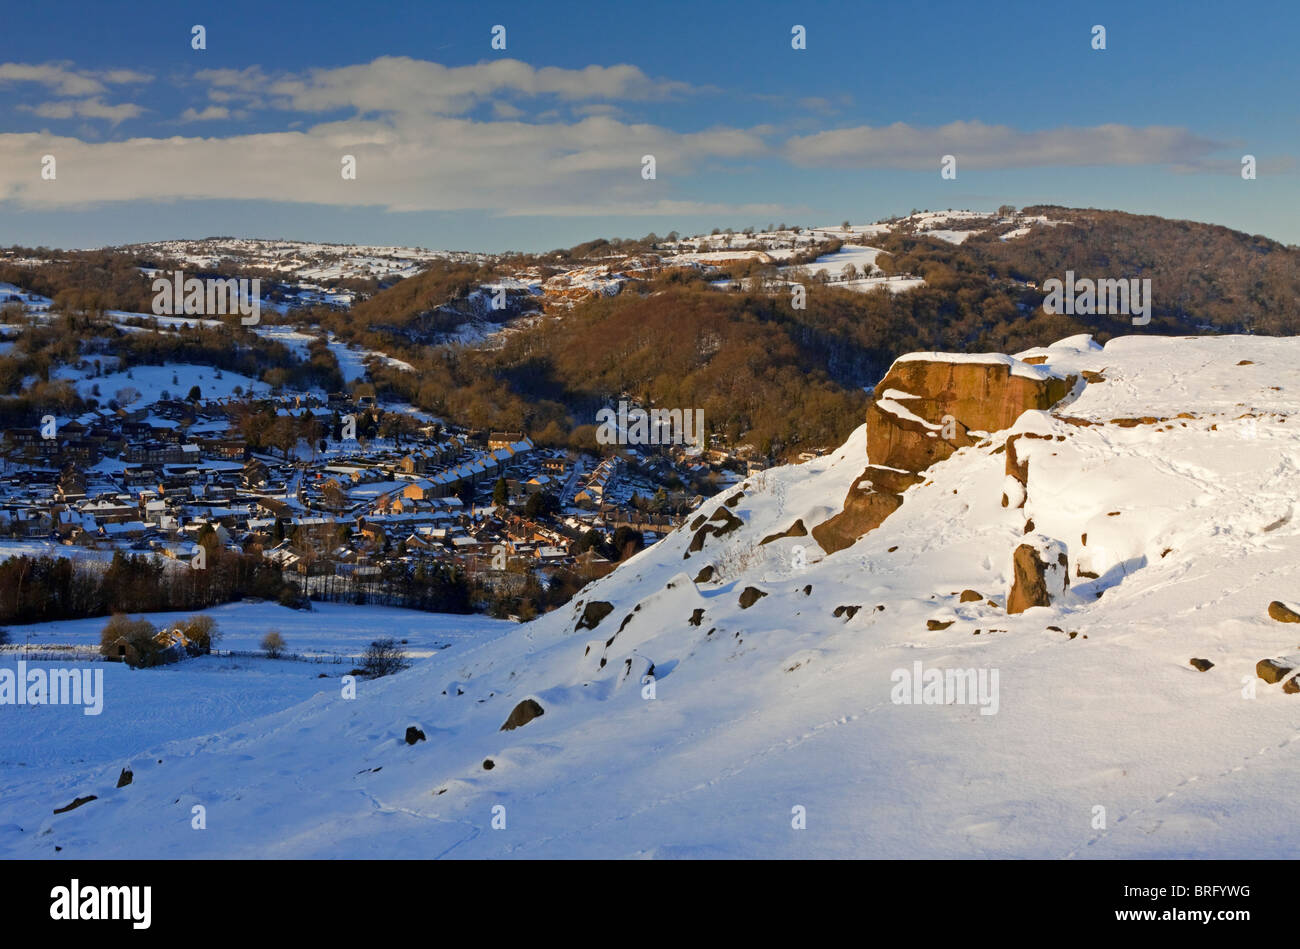 View from Black Rocks towards Cromford village in the Derbyshire Dales in the Peak District England after a fall of heavy snow Stock Photo